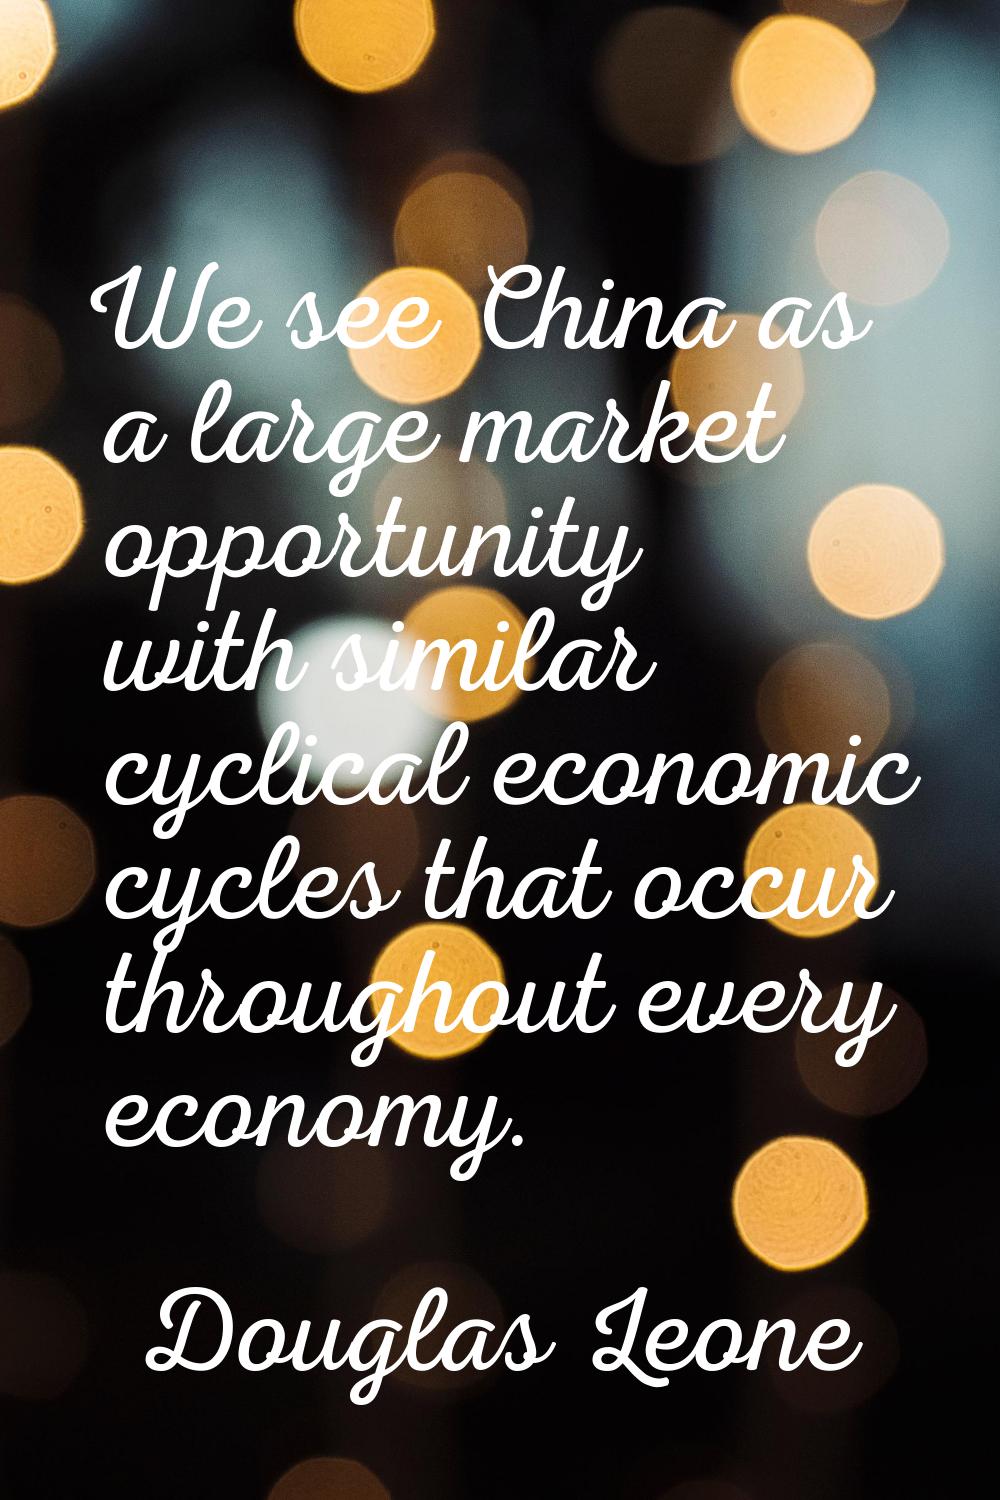 We see China as a large market opportunity with similar cyclical economic cycles that occur through